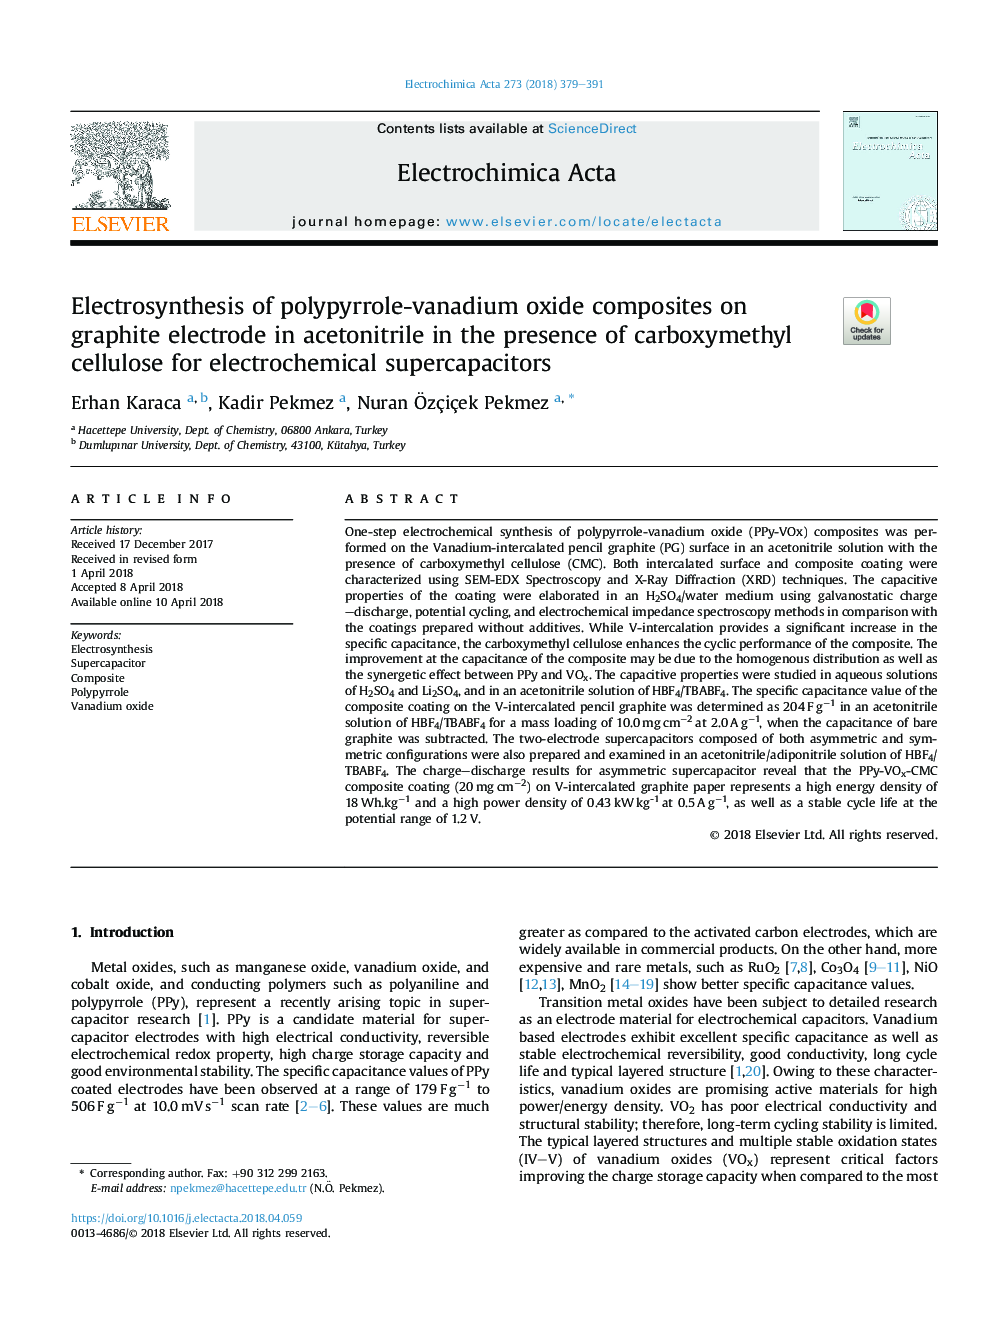 Electrosynthesis of polypyrrole-vanadium oxide composites on graphite electrode in acetonitrile in the presence of carboxymethyl cellulose for electrochemical supercapacitors